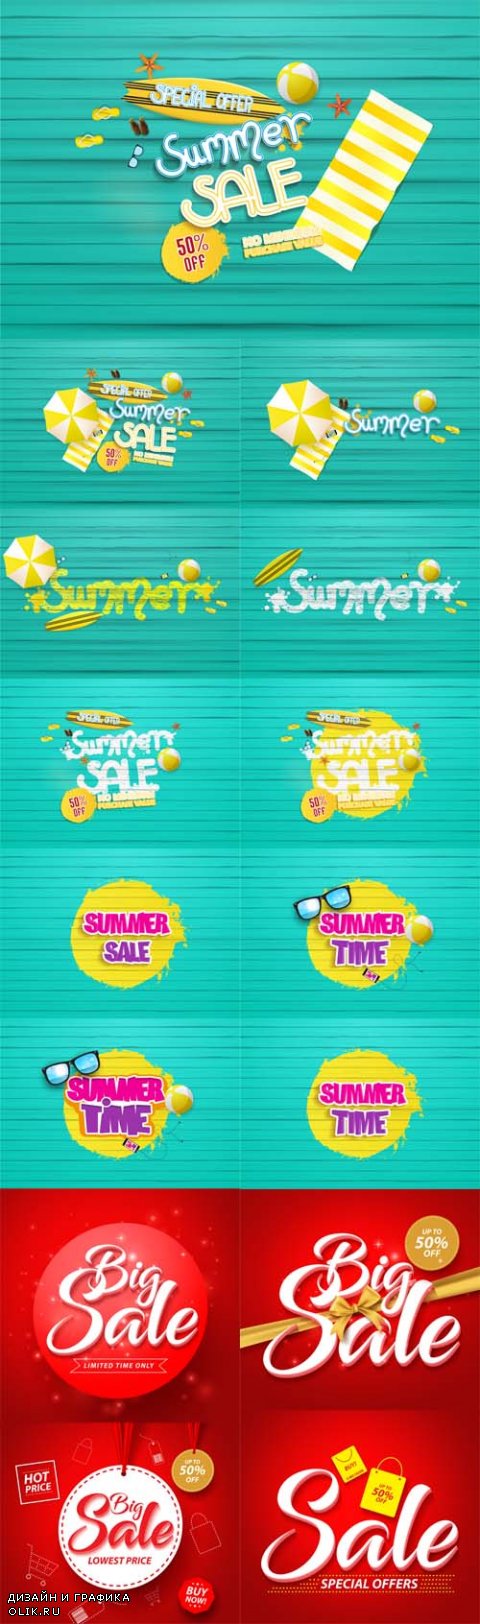 Vector Summer Sale Background with Painted Wooden Floor and Beach Products